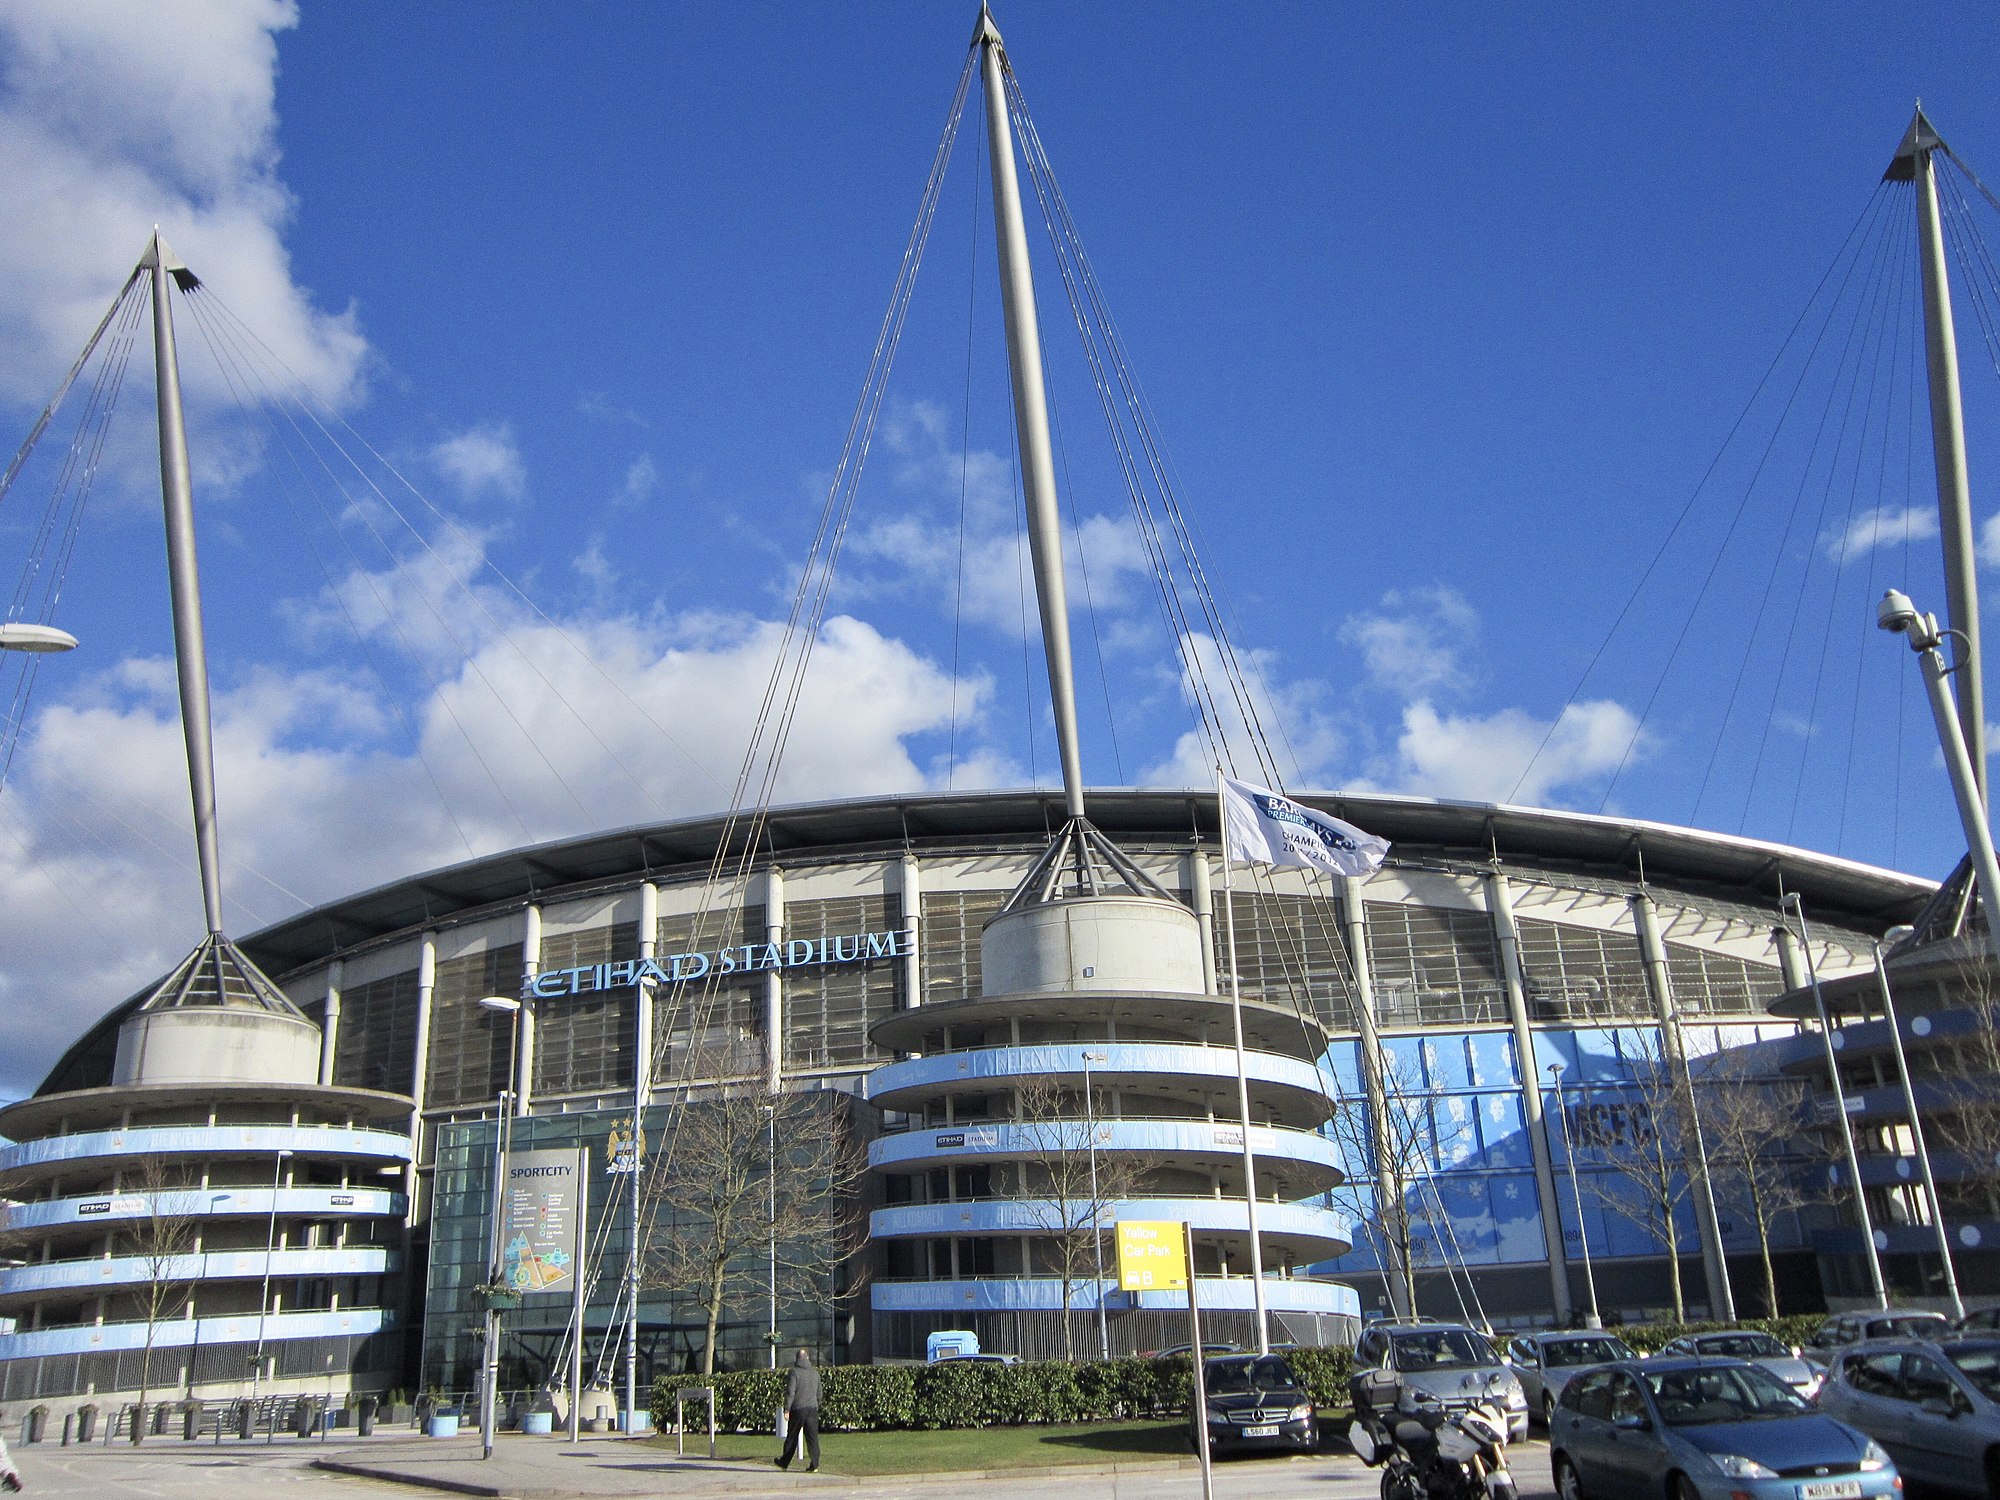 The Etihad, potential home of Declan Rice